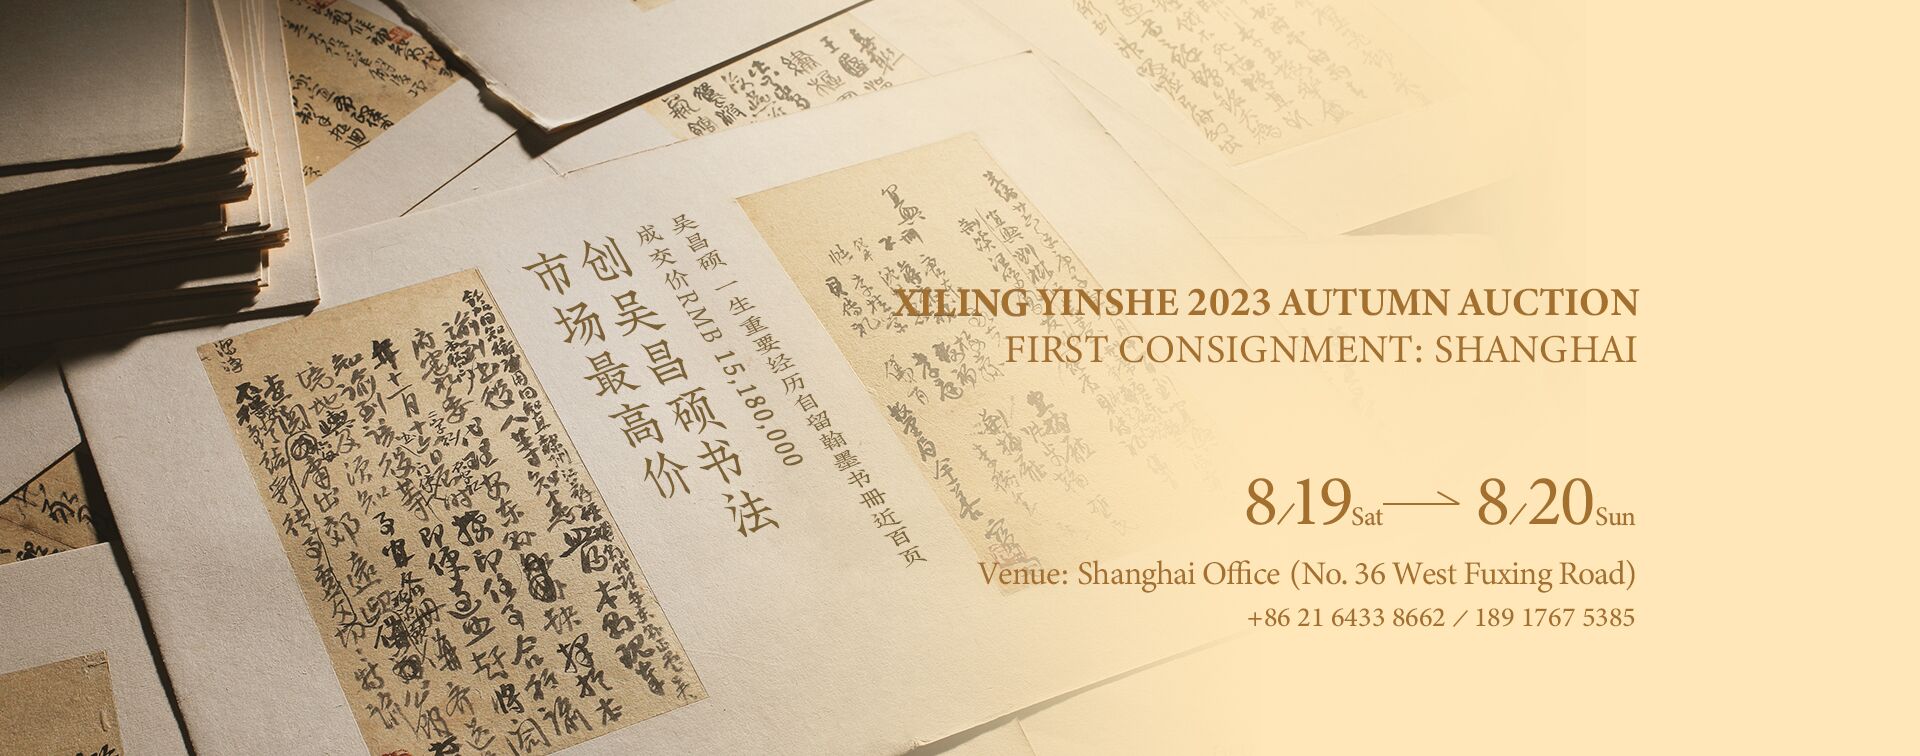 Xiling Yinshe 2023 Autumn Auction Consignment in Shanghai